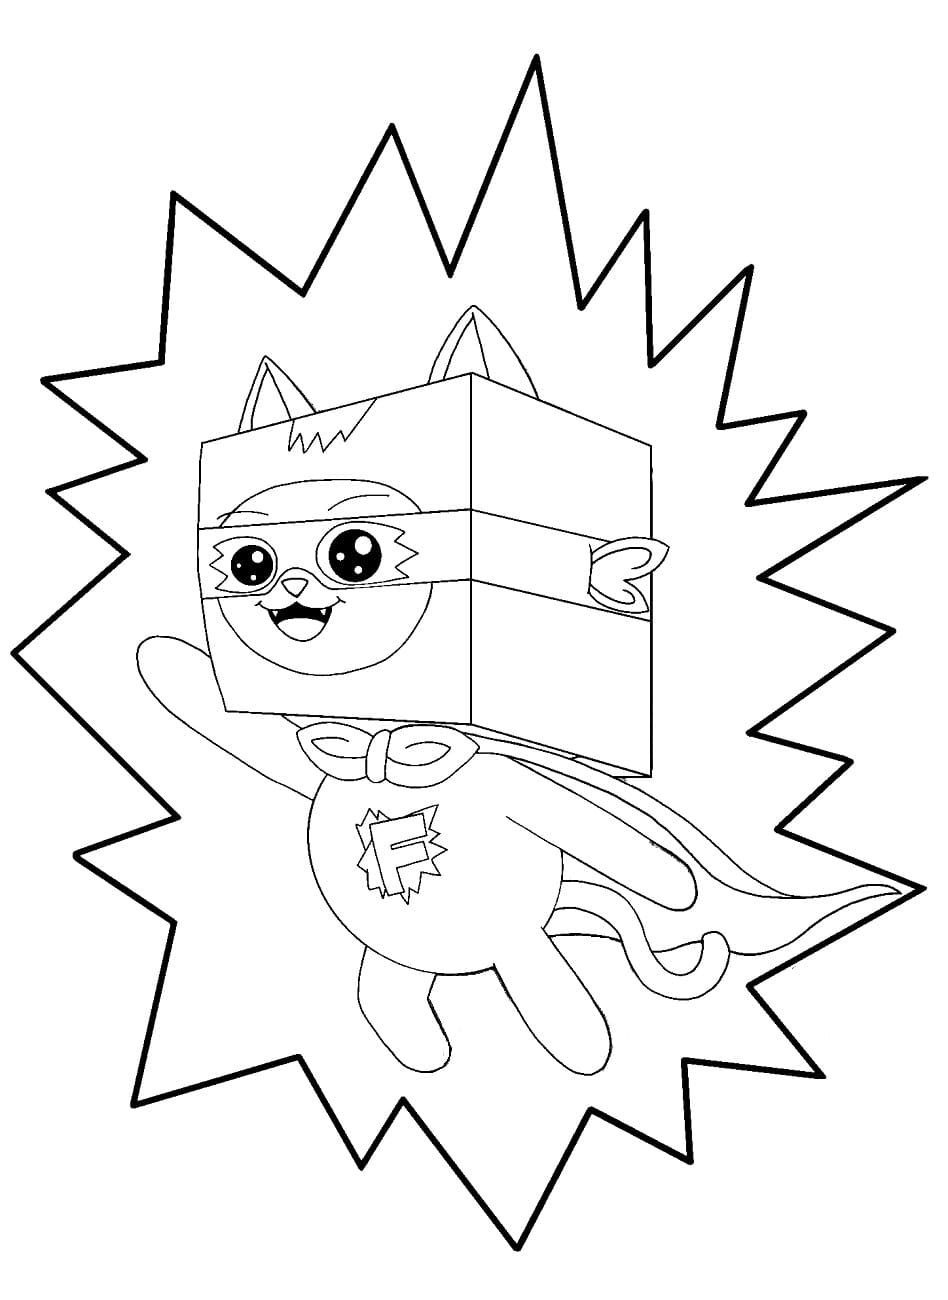 16+ Unikitty Coloring Page